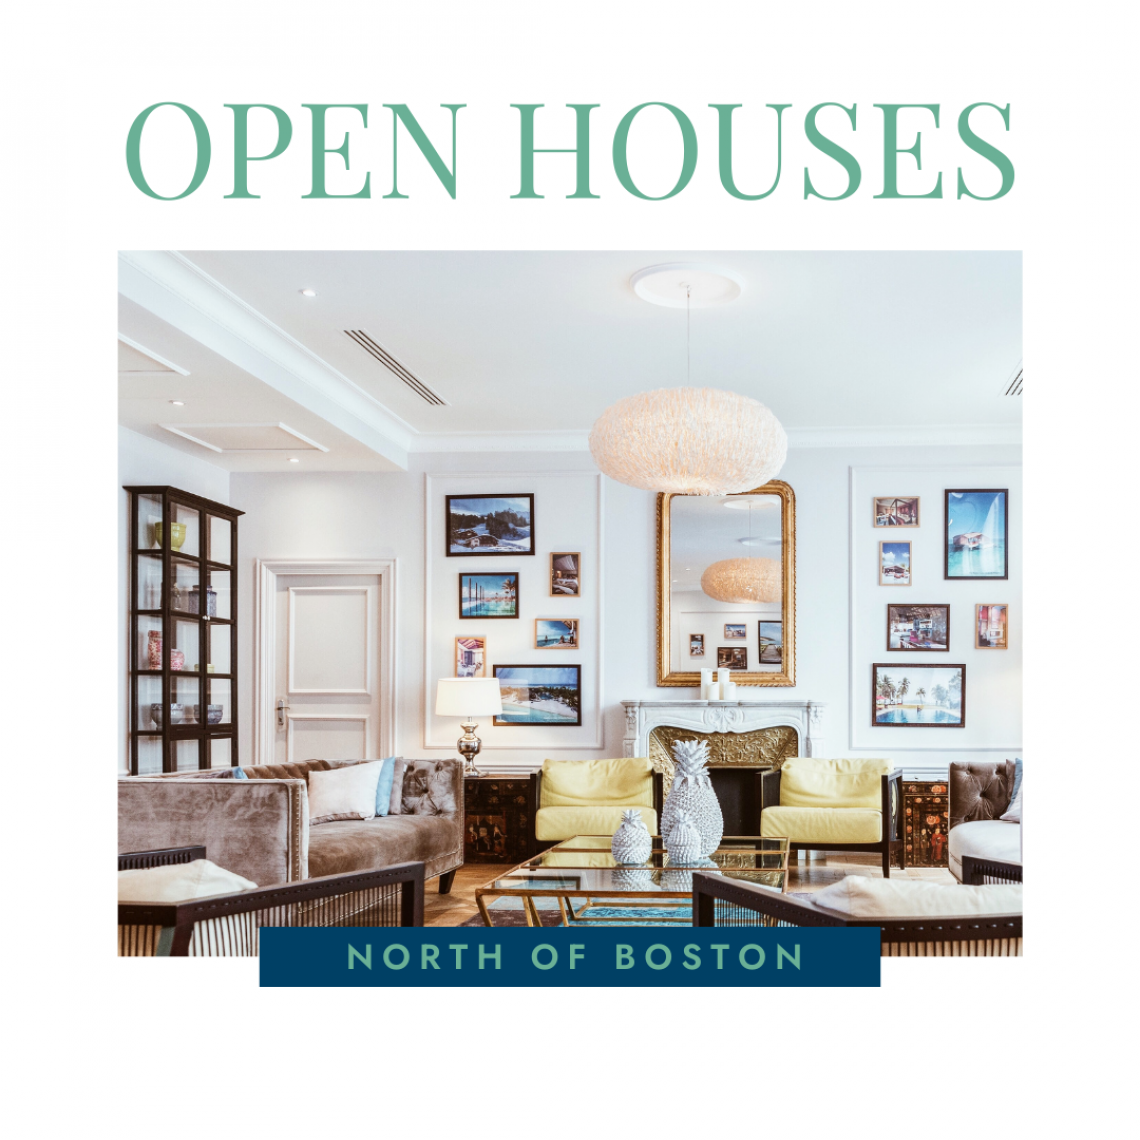 Open Houses North of Boston